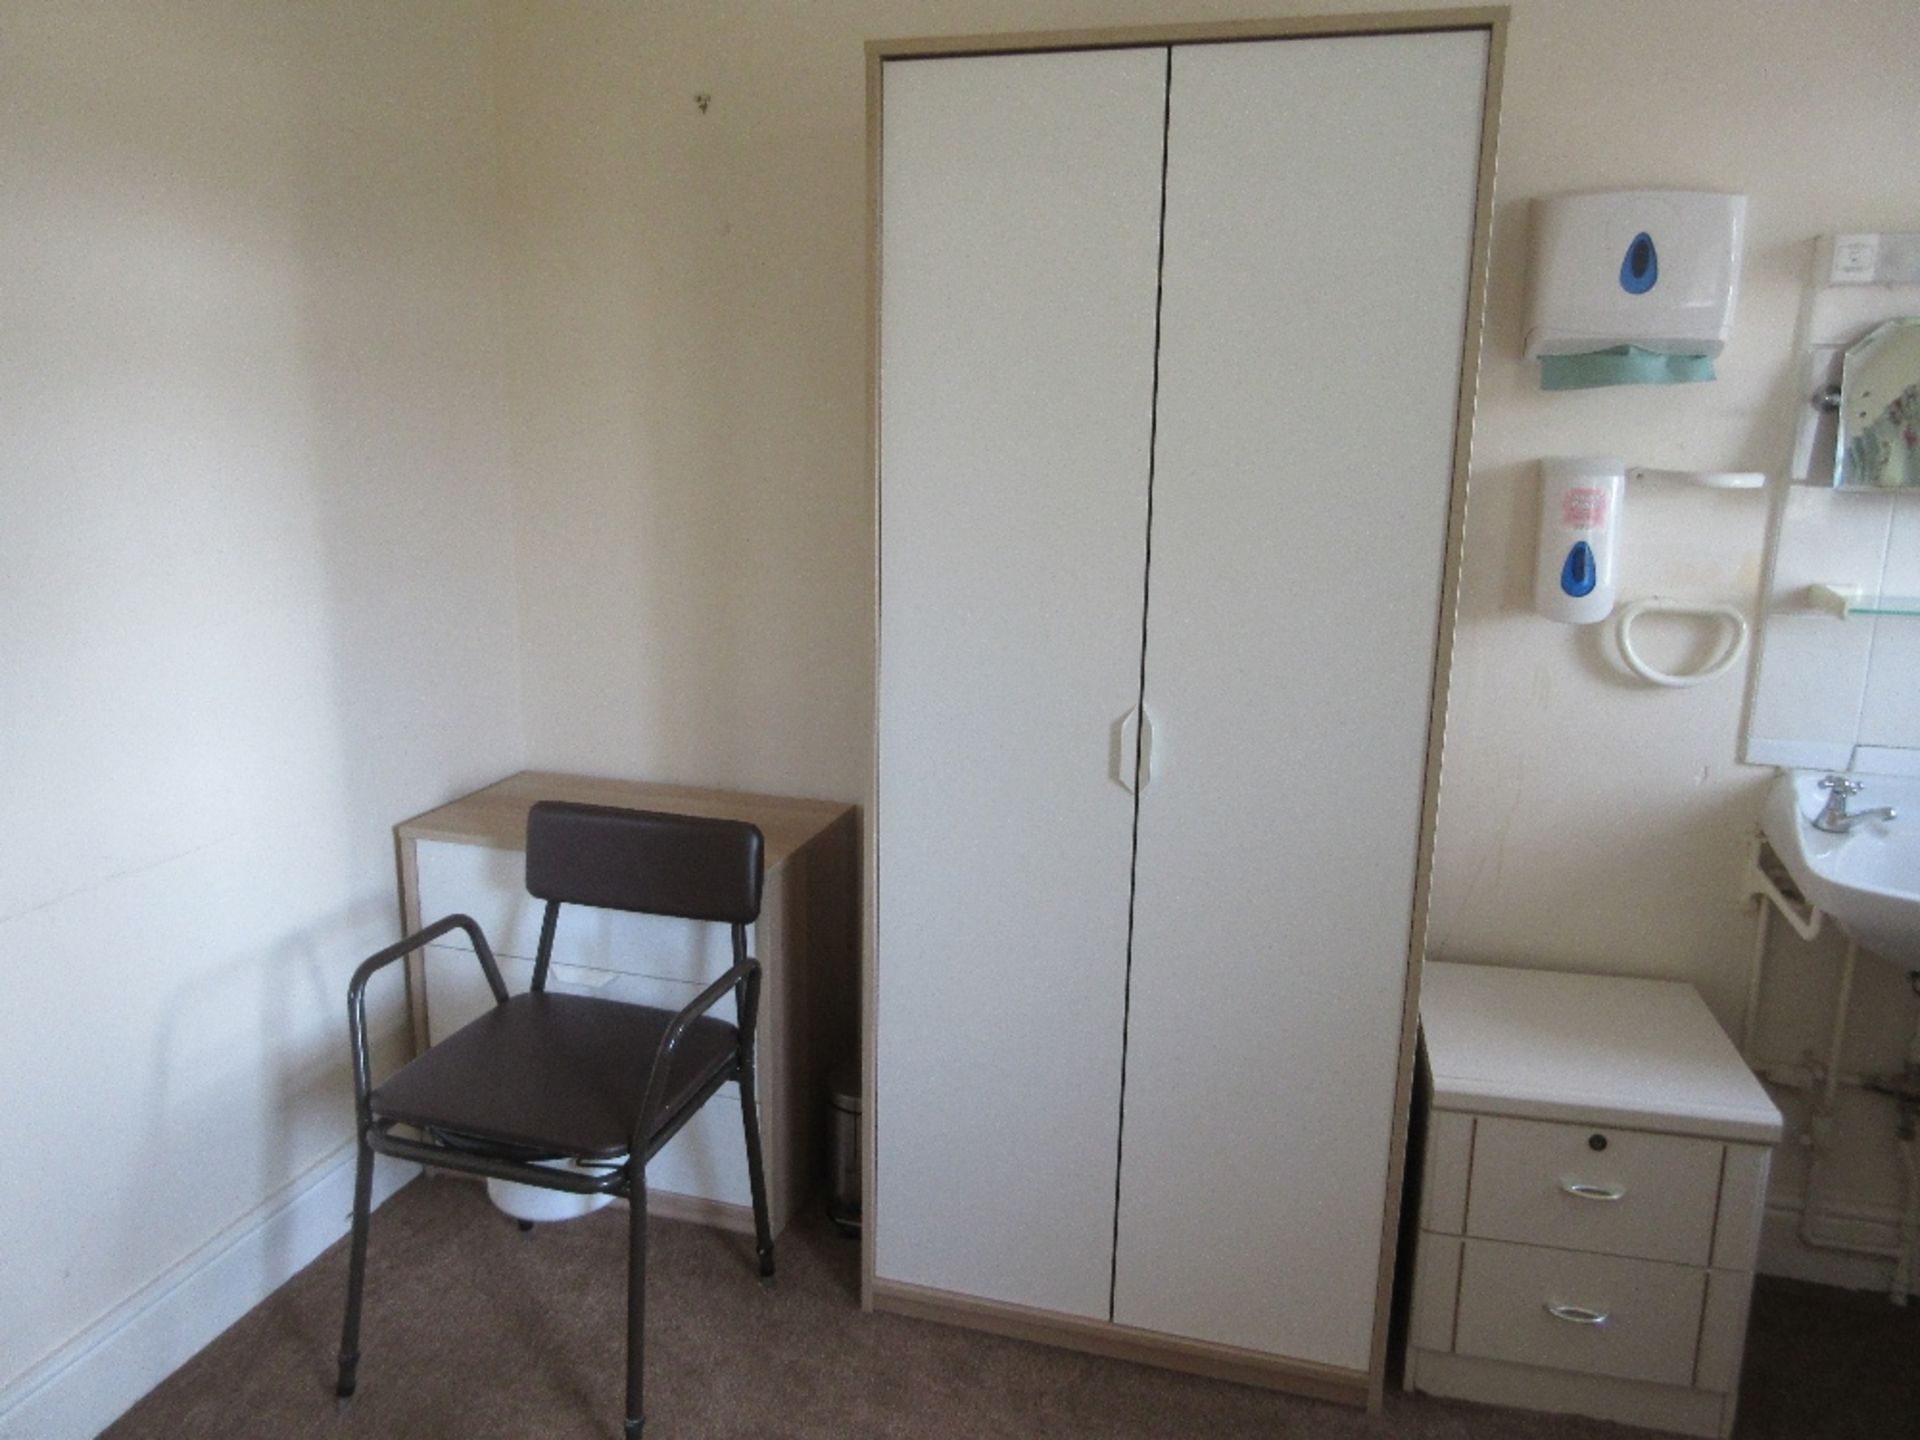 Contents of Room 7 to include: high back chair, commode, height adjusting table, wardrobe, three